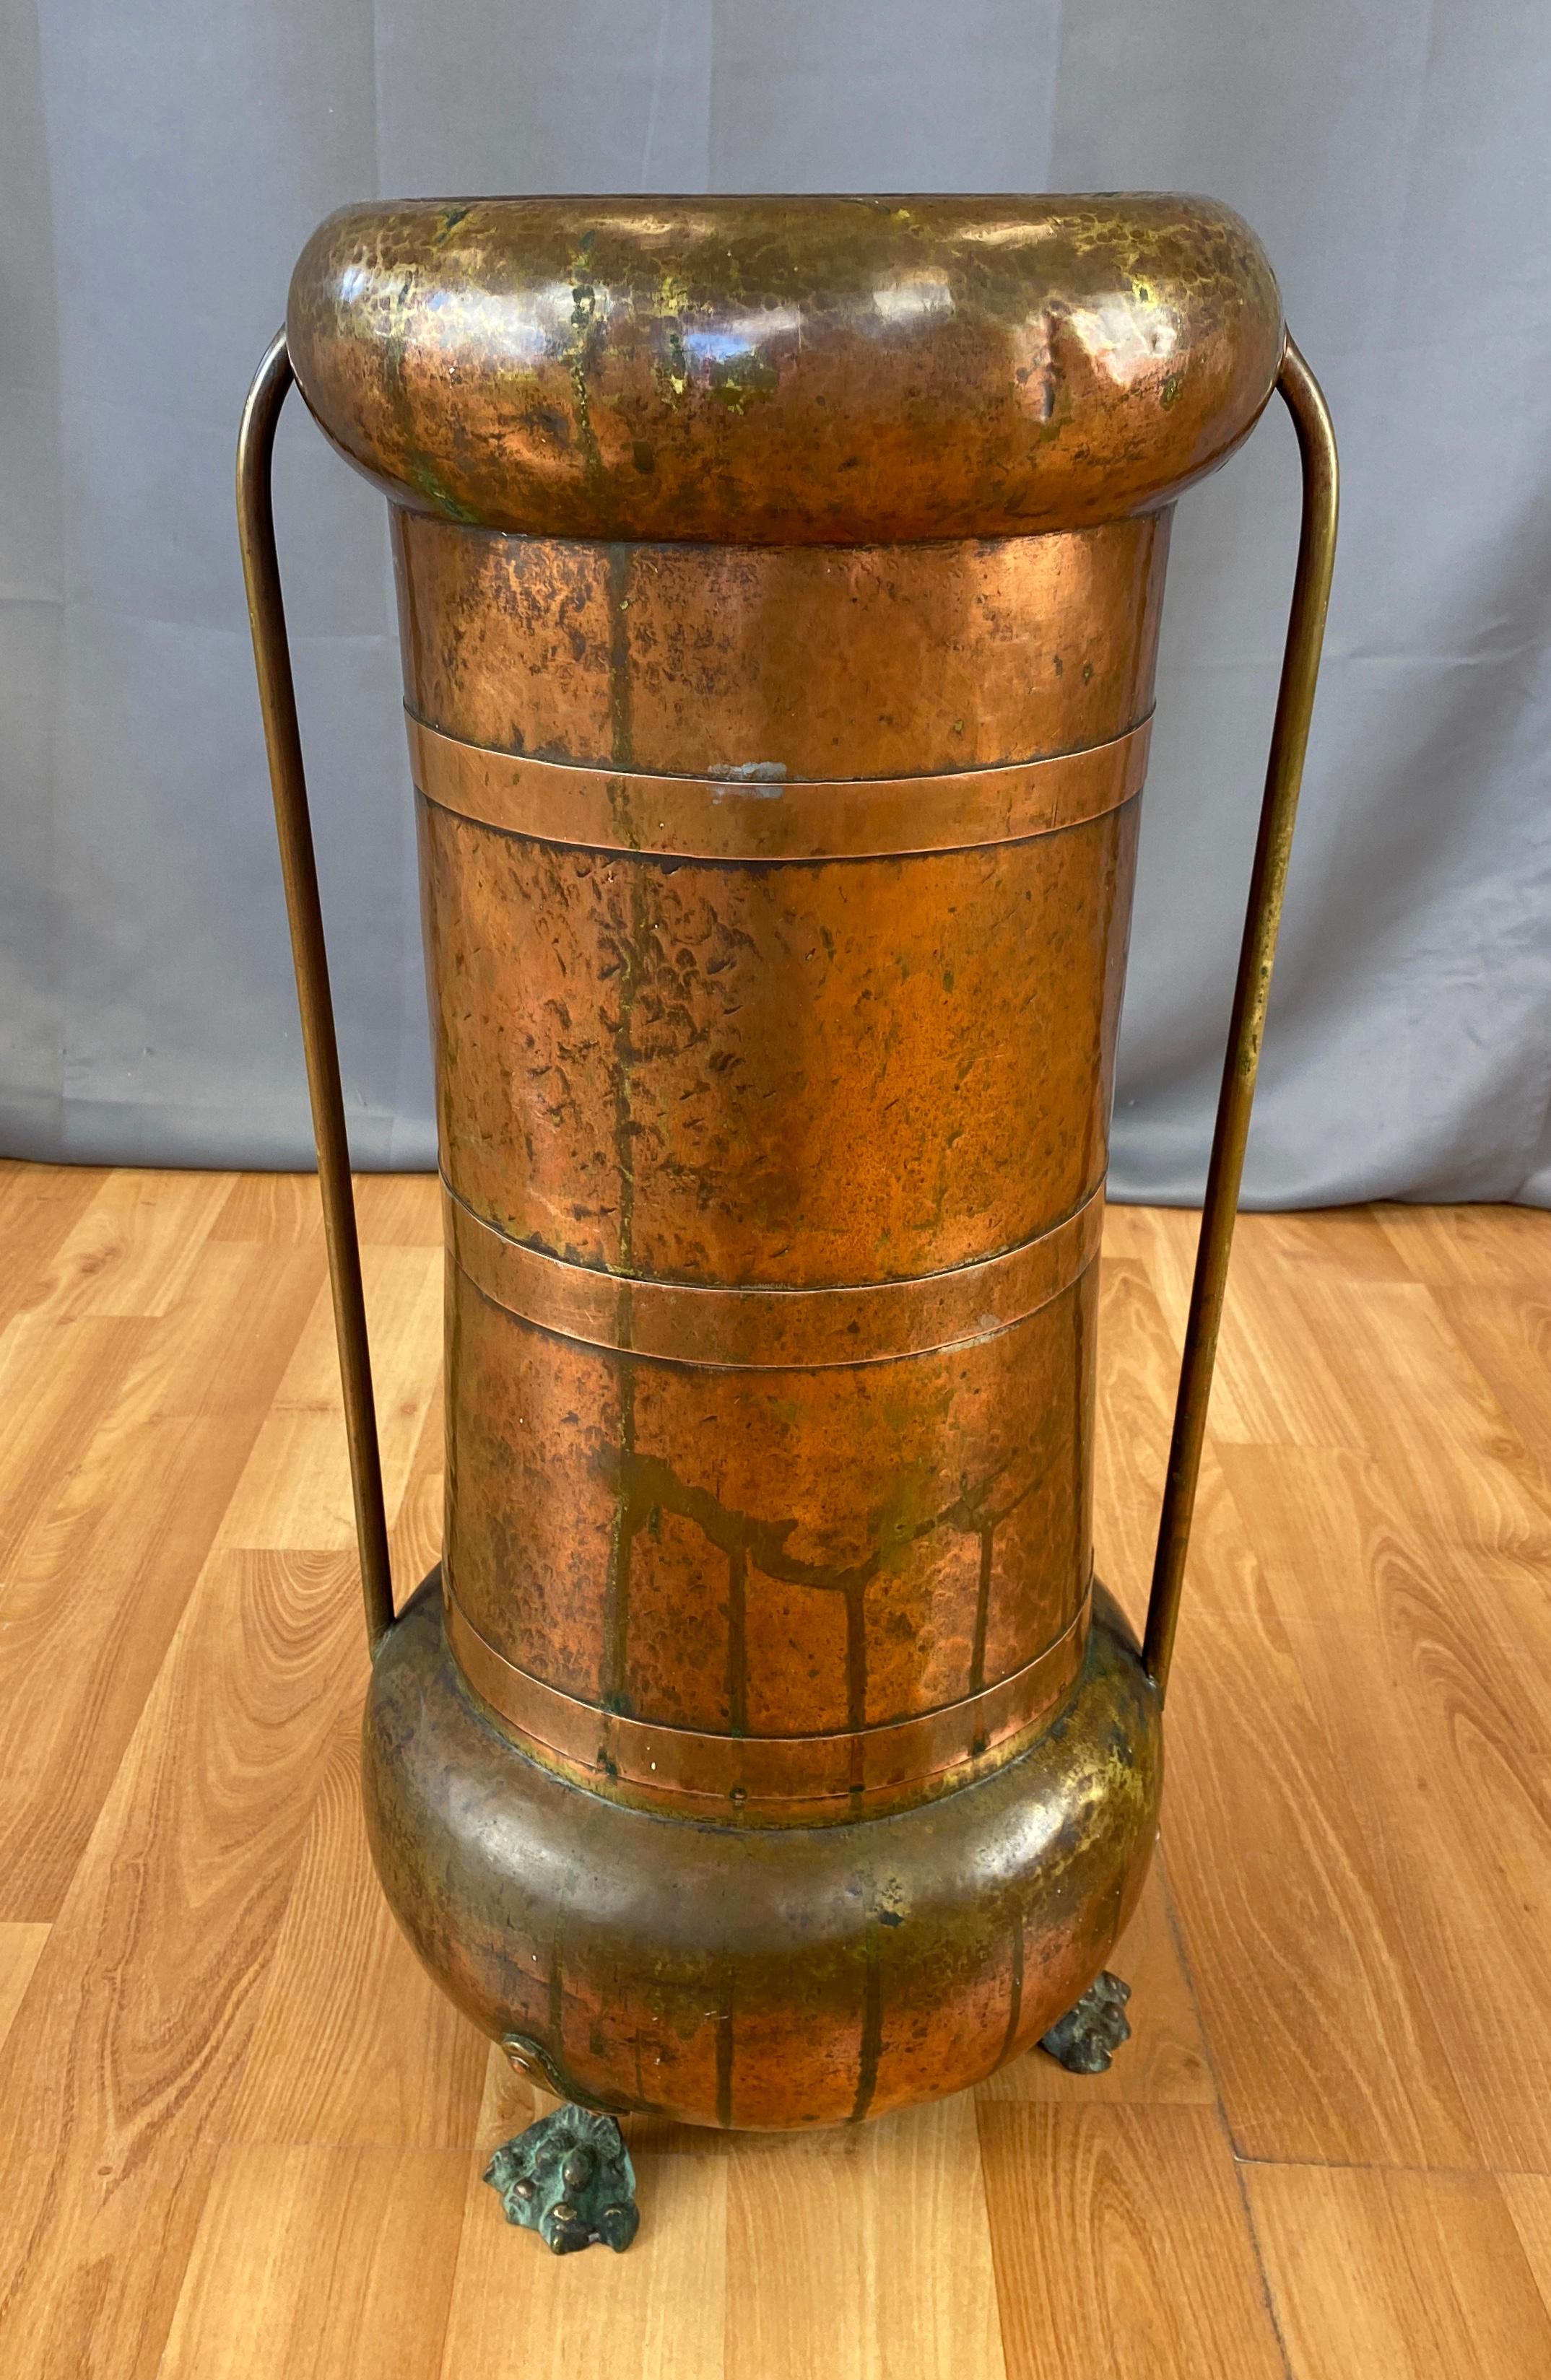 Offered here is a Arts & Crafts style hammered copper footed umbrella or cane stand that's Russian, has a Imperial Double Headed Eagle stamped on it's under side (14 photo). 
Wonderful finish, and patina that can only come with age.